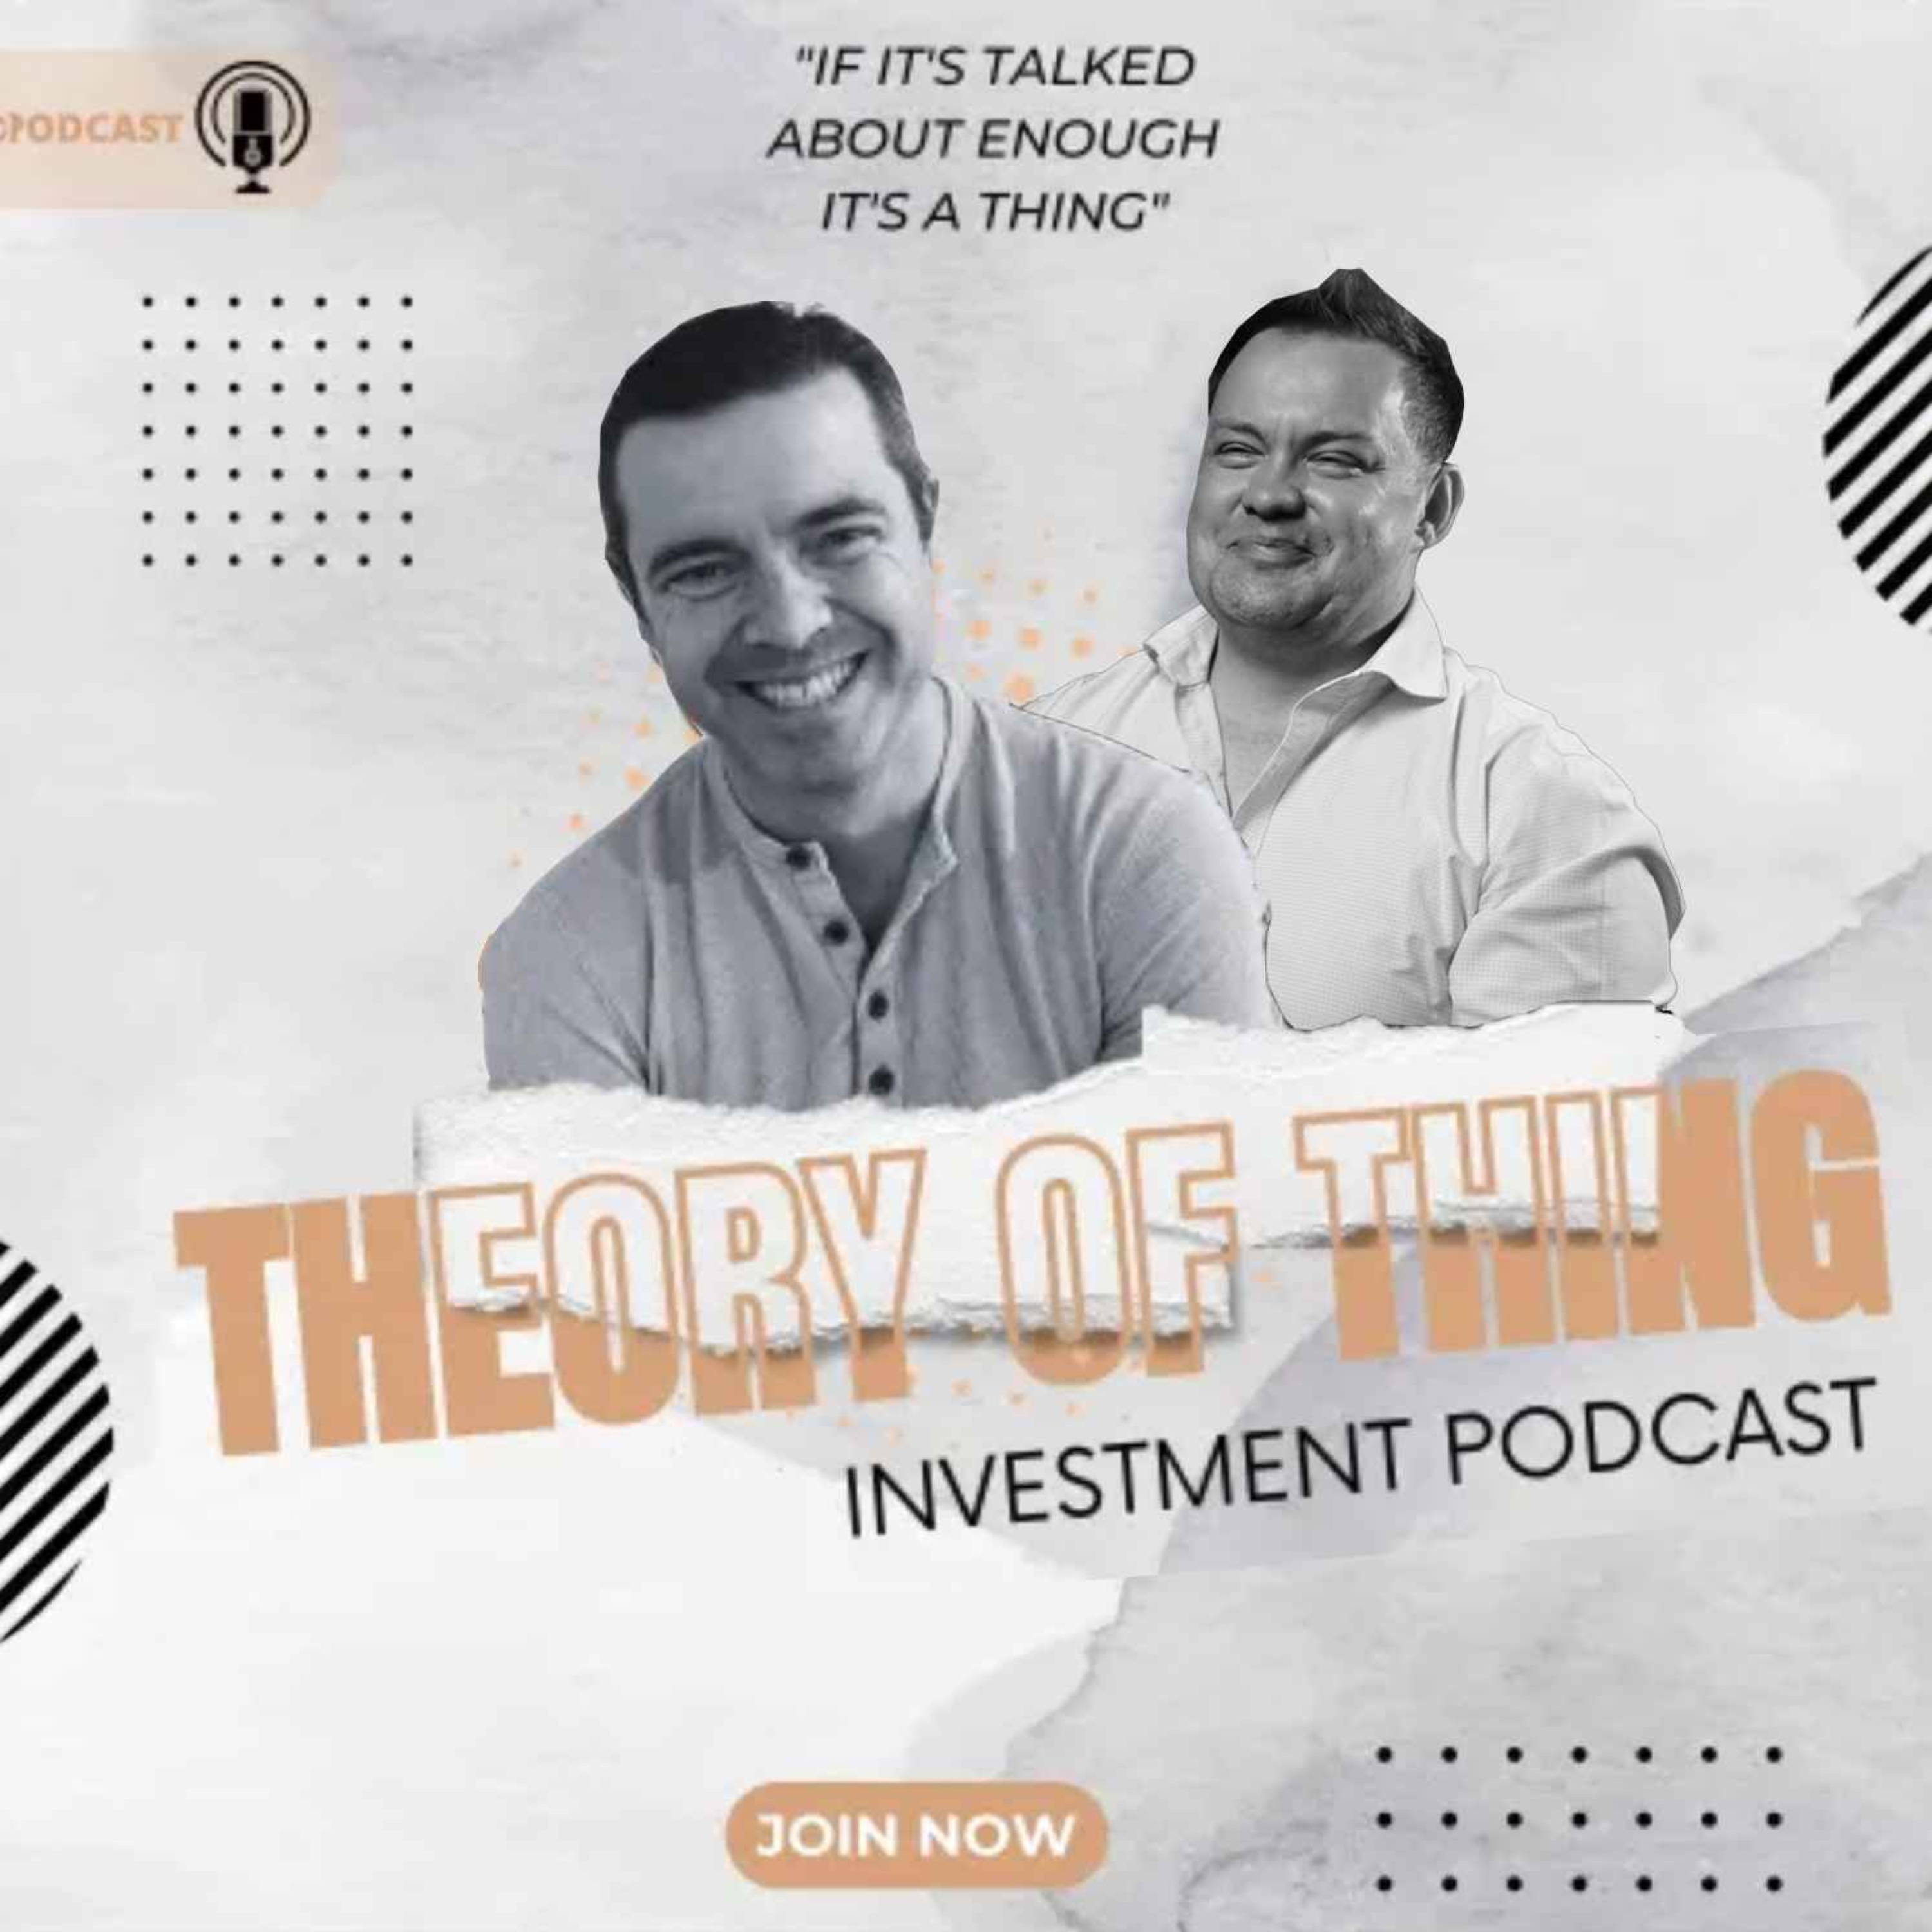 Episode 34 of ”The Theory of Thing Investment Podcast